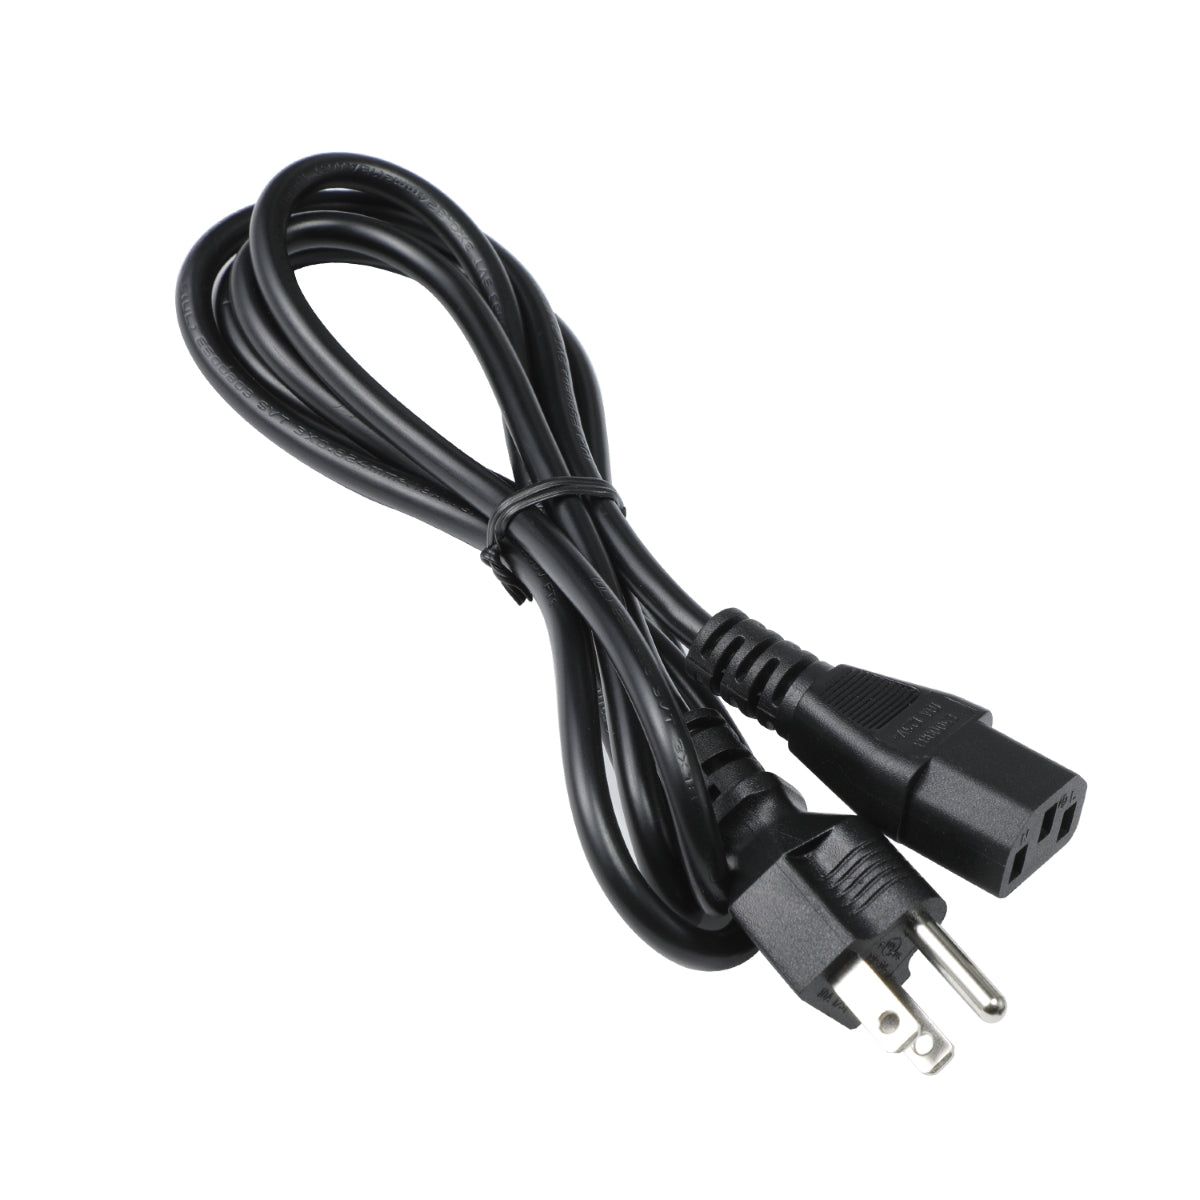 Power Cable for Philips 243V7QJAB Monitor.